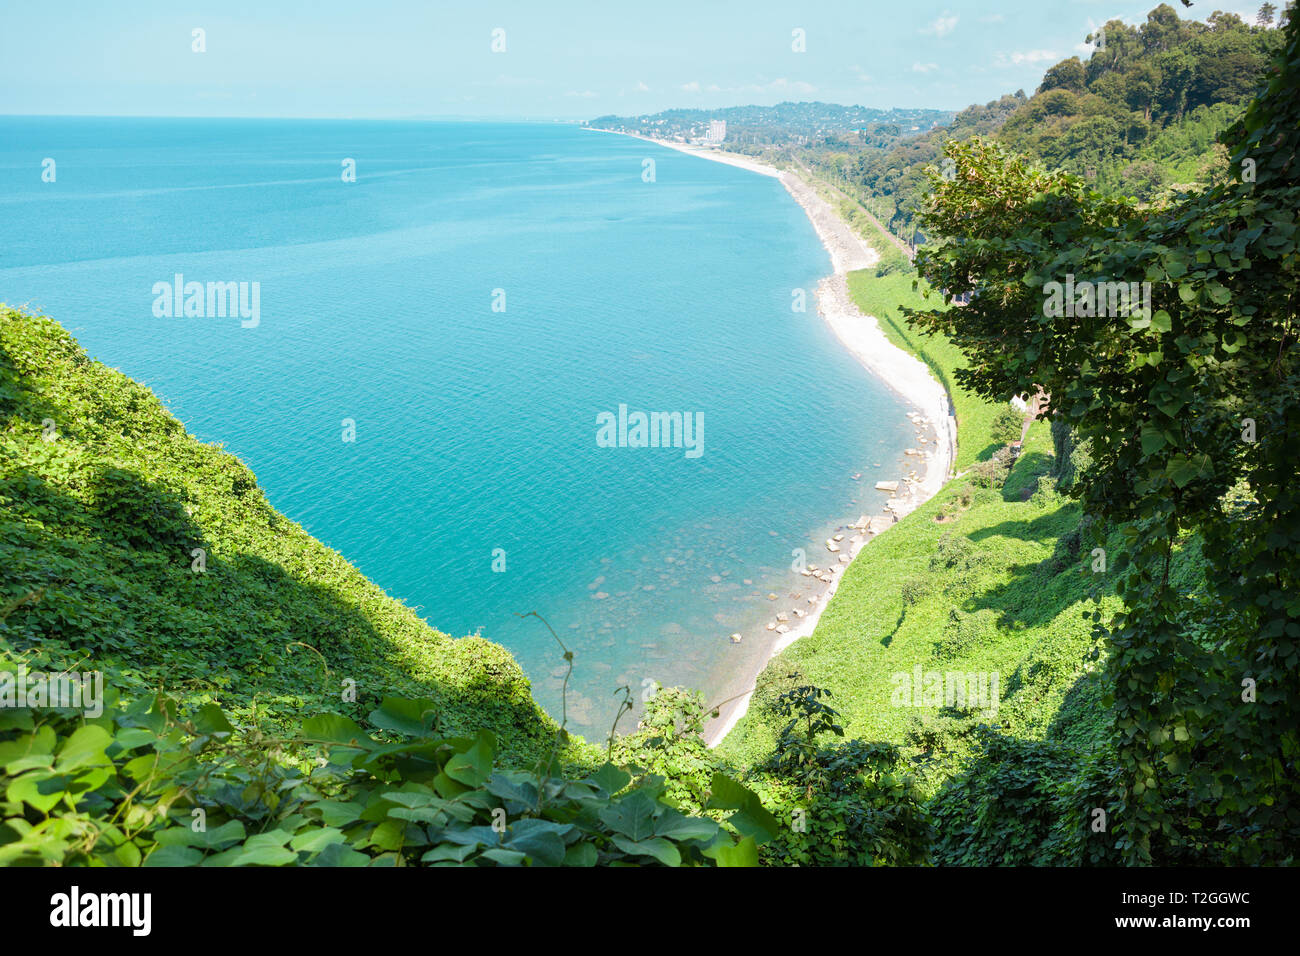 Beautiful view of the Black sea from Botanical garden in Batumi, Georgia. Bright landscape with green-blue water and a lot of greenery on the hills Stock Photo